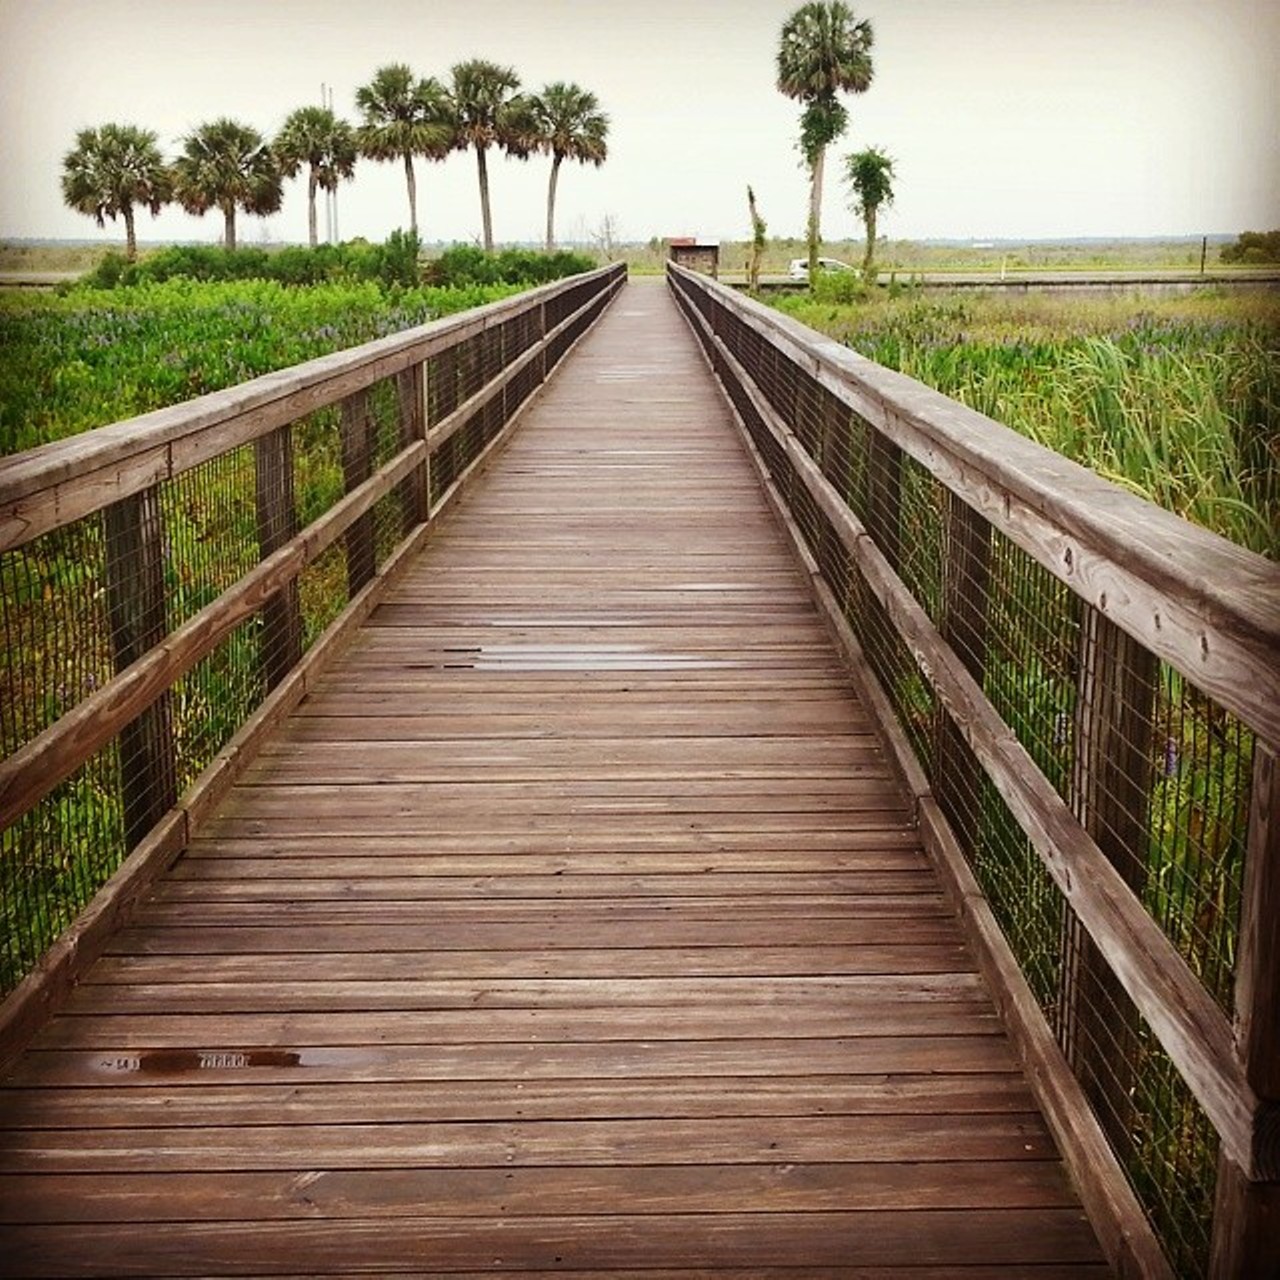 Paynes Prairie Preserve State Park
100 Savannah Blvd., Micanopy, Fla. 32667 | 352-466-3397
Wake up with the sun to the sound of nothing (which is probably why you went camping in the first place) and go for a hike down one of Paynes Prairie&#146;s eight trails. With such little civilization nearby, this is a great place to look up and gaze at the stars.
Photo via wiilykherr on Instagram